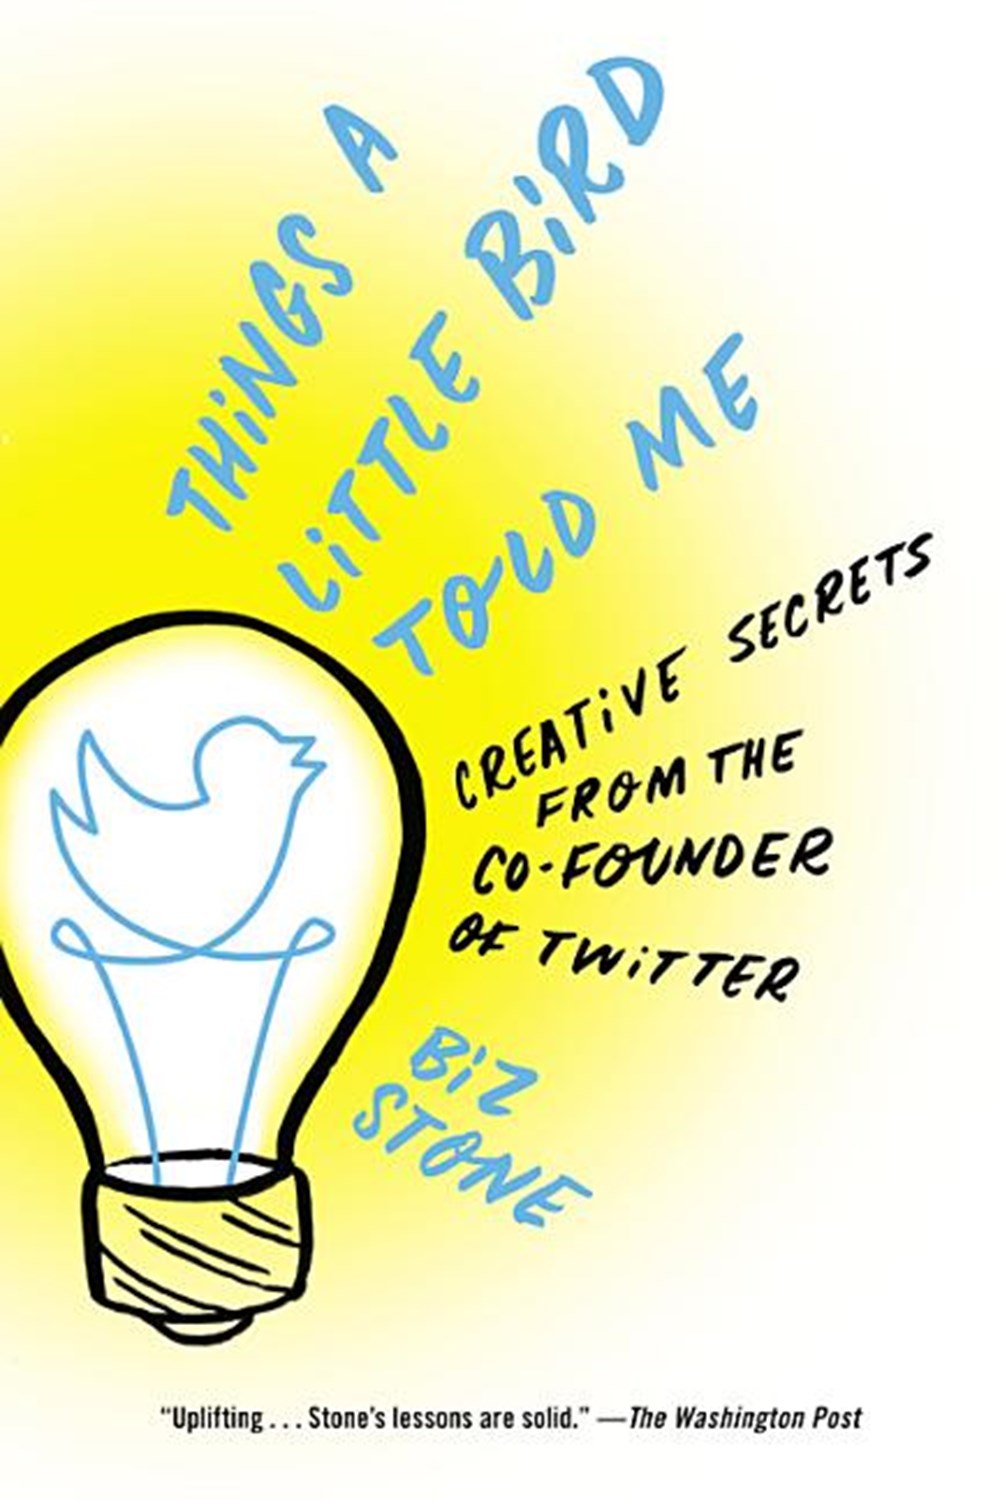 Things a Little Bird Told Me Creative Secrets from the Co-Founder of Twitter